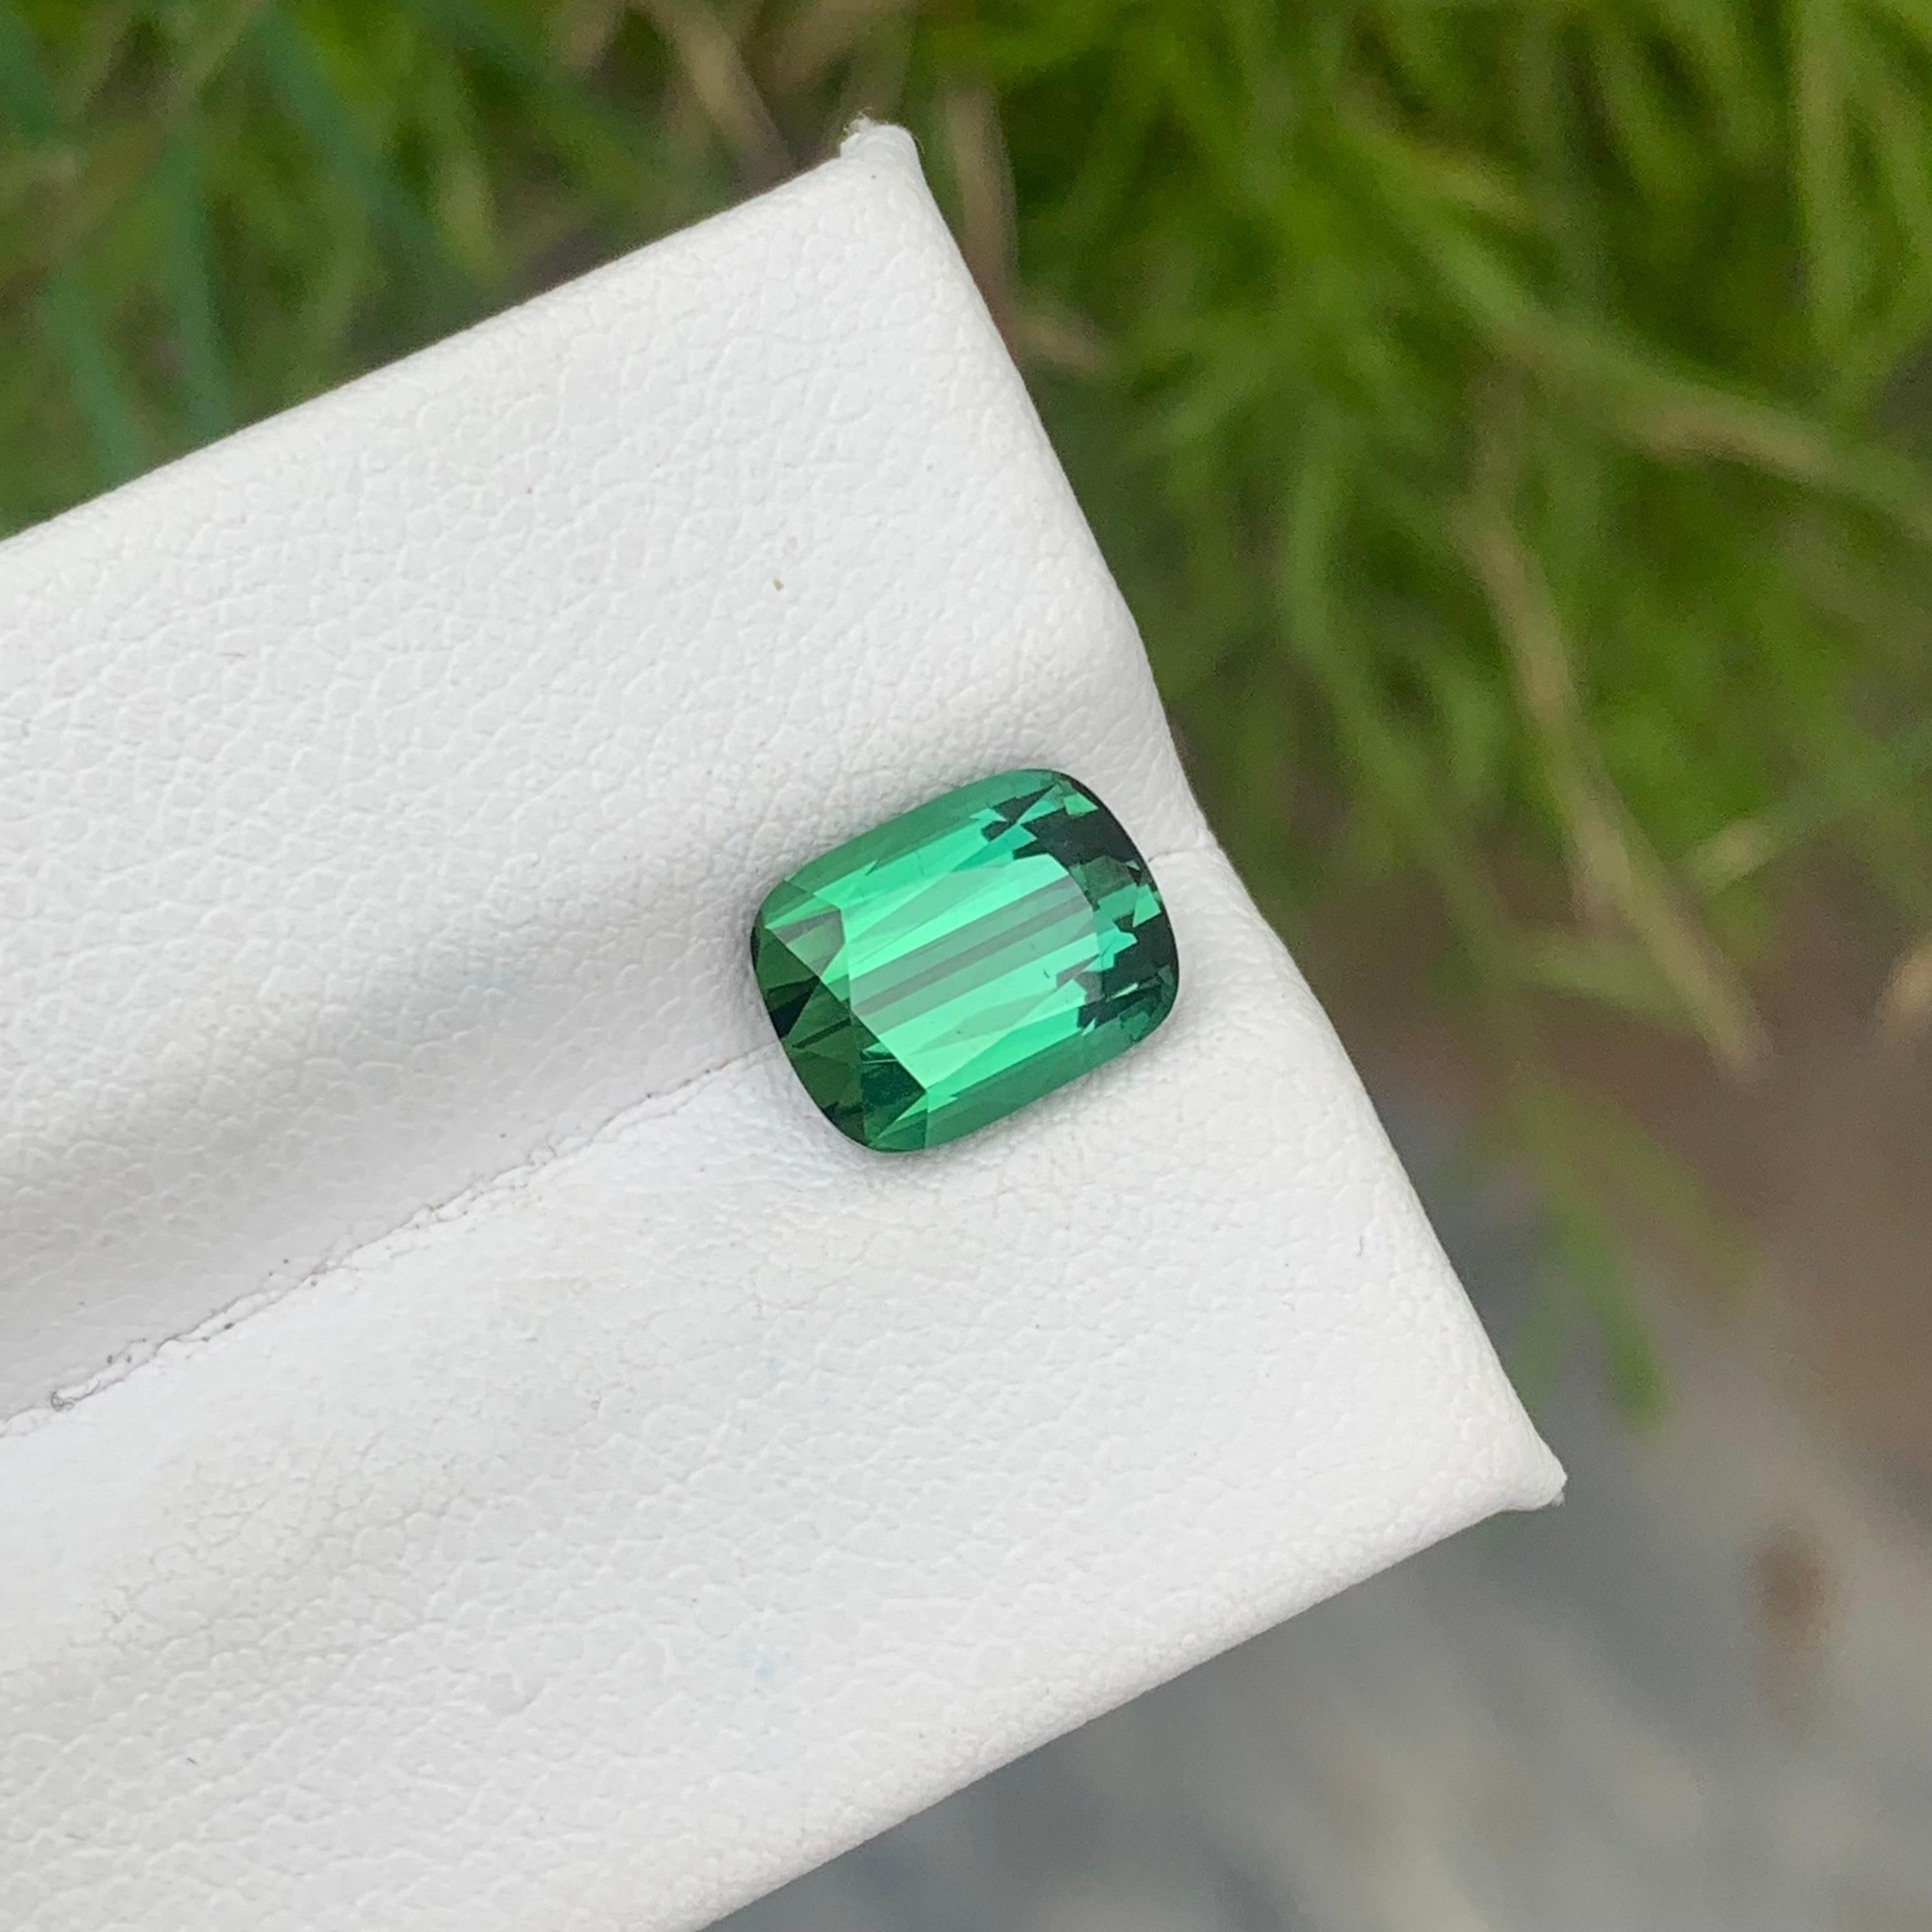 Cushion Cut 2.65 Carat Cushion Loose Tourmaline Adding Sparkle to Your Jewelry Collection For Sale